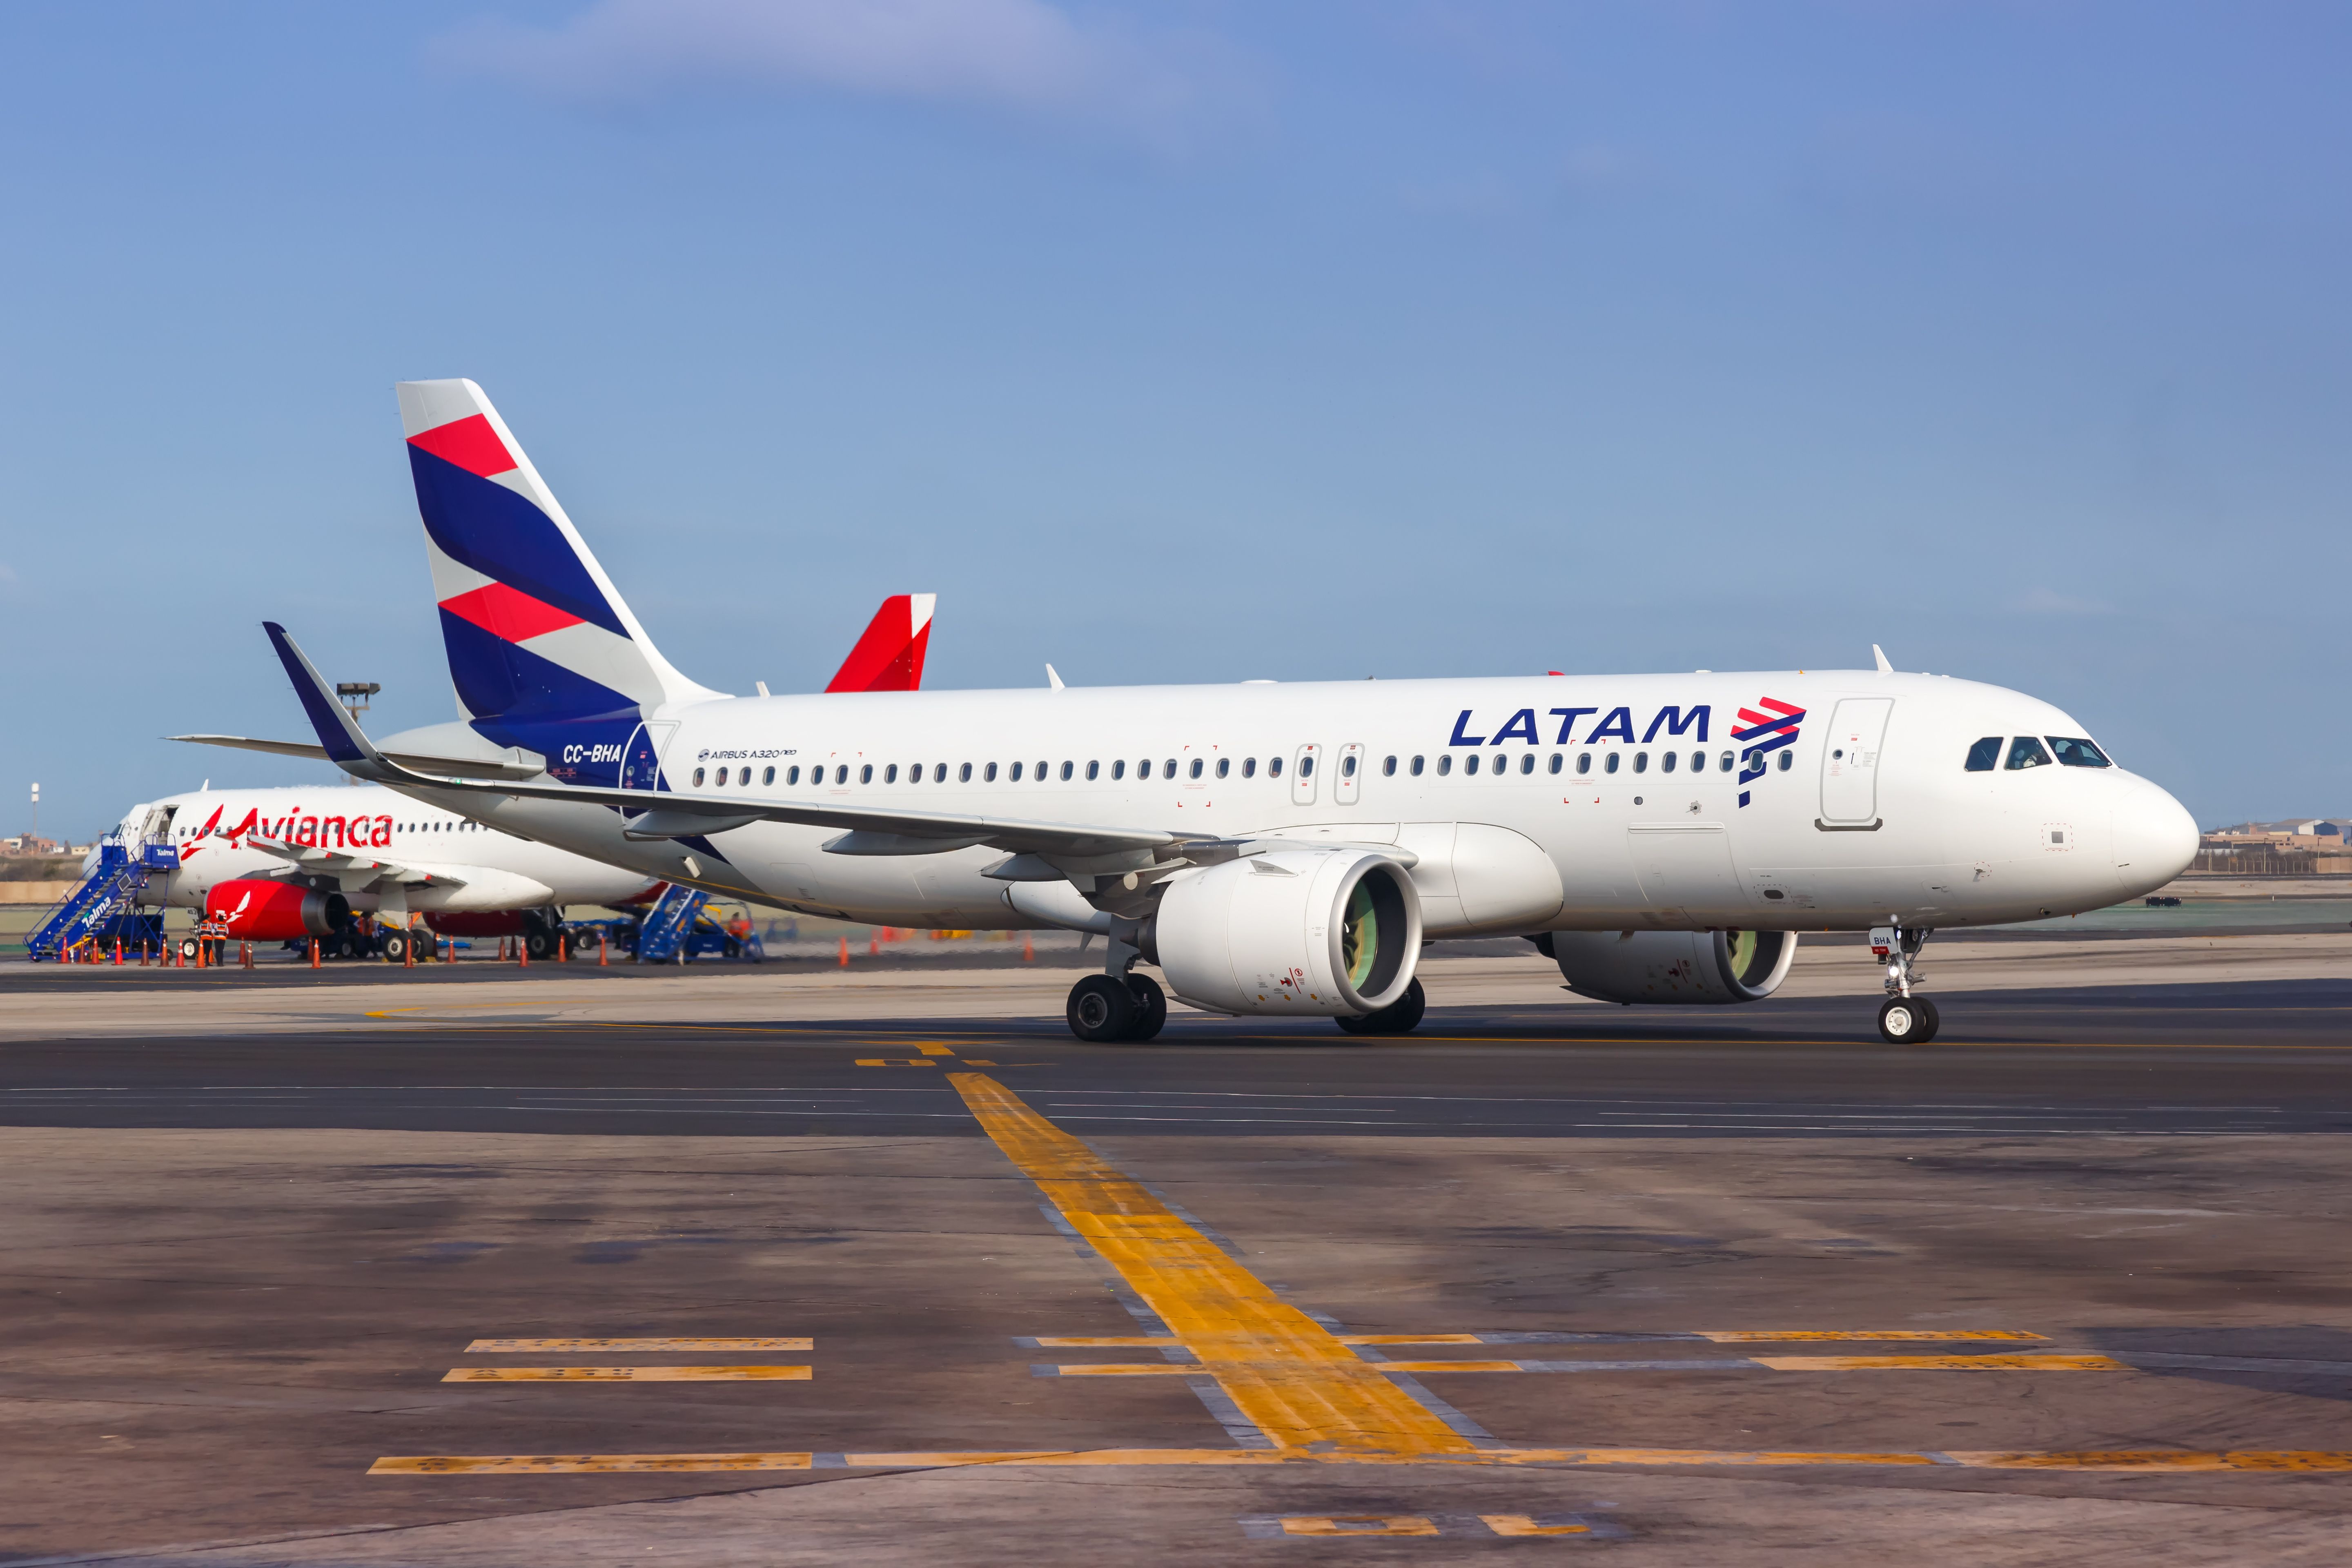 A LATAM Airlines Airbus A320neo on the apron at Lima Airport.